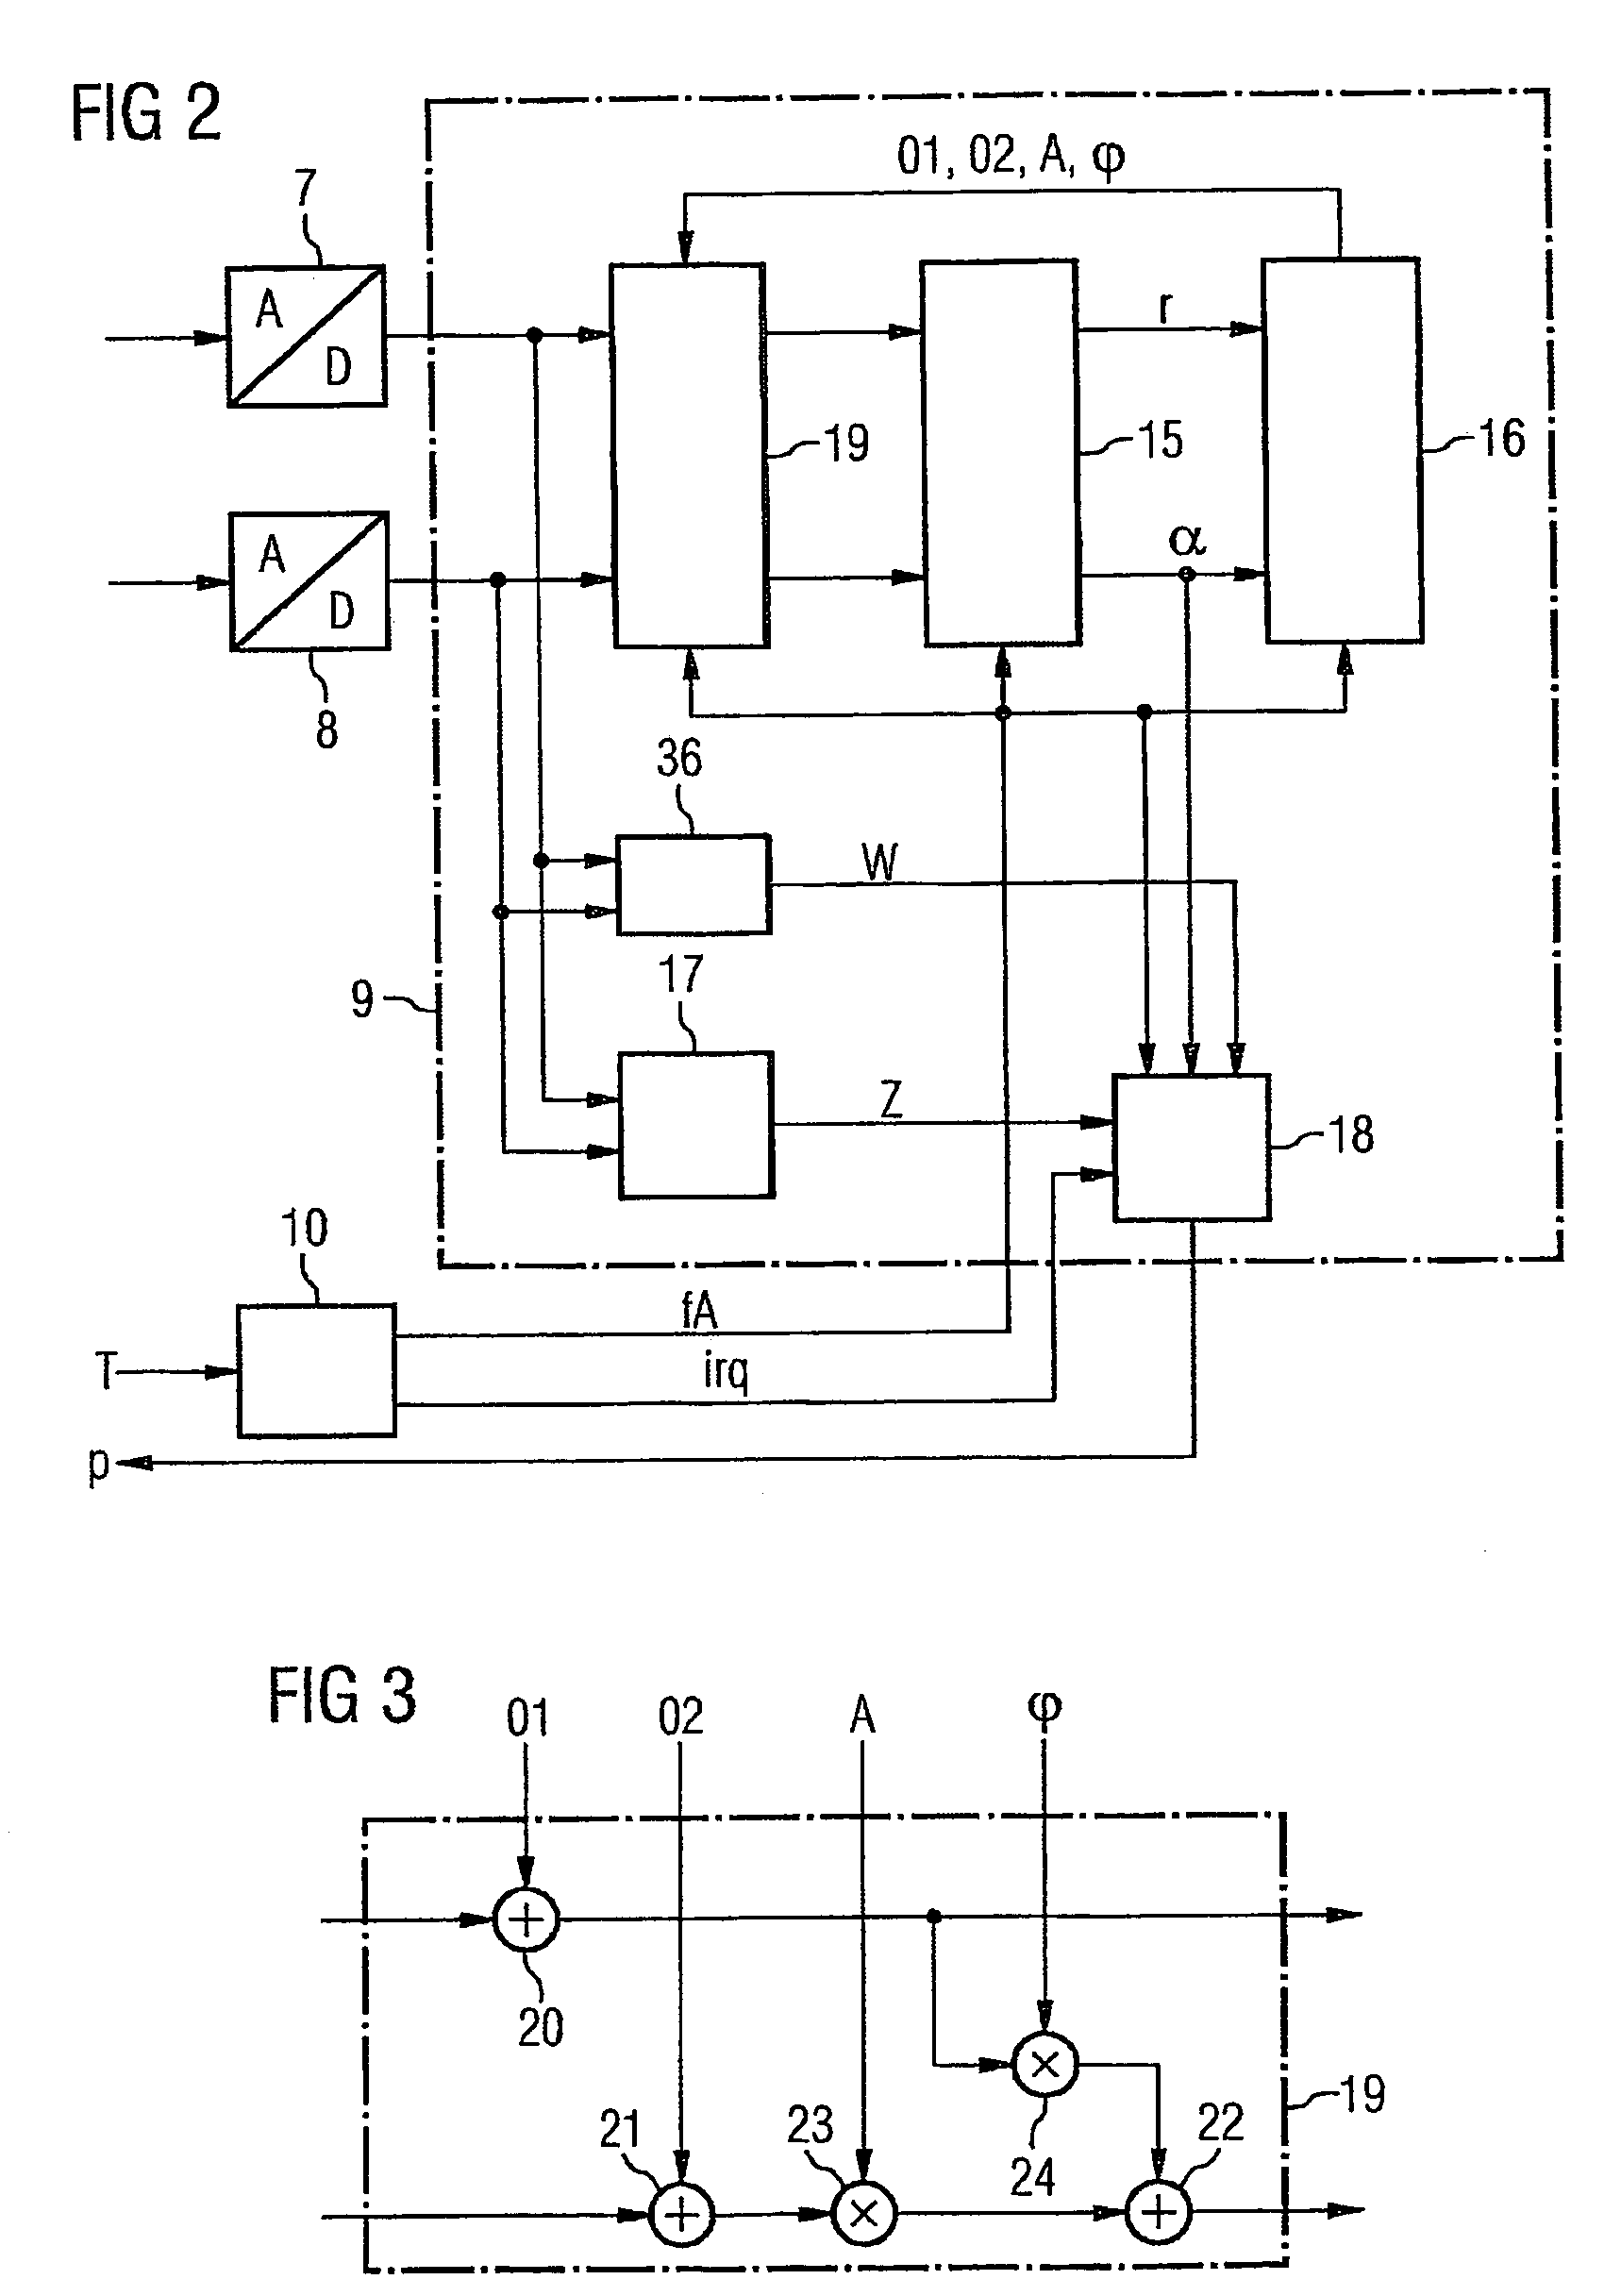 Method for the evaluation of a first analog signal and a second analog signal, and evaluation circuit corresponding therewith